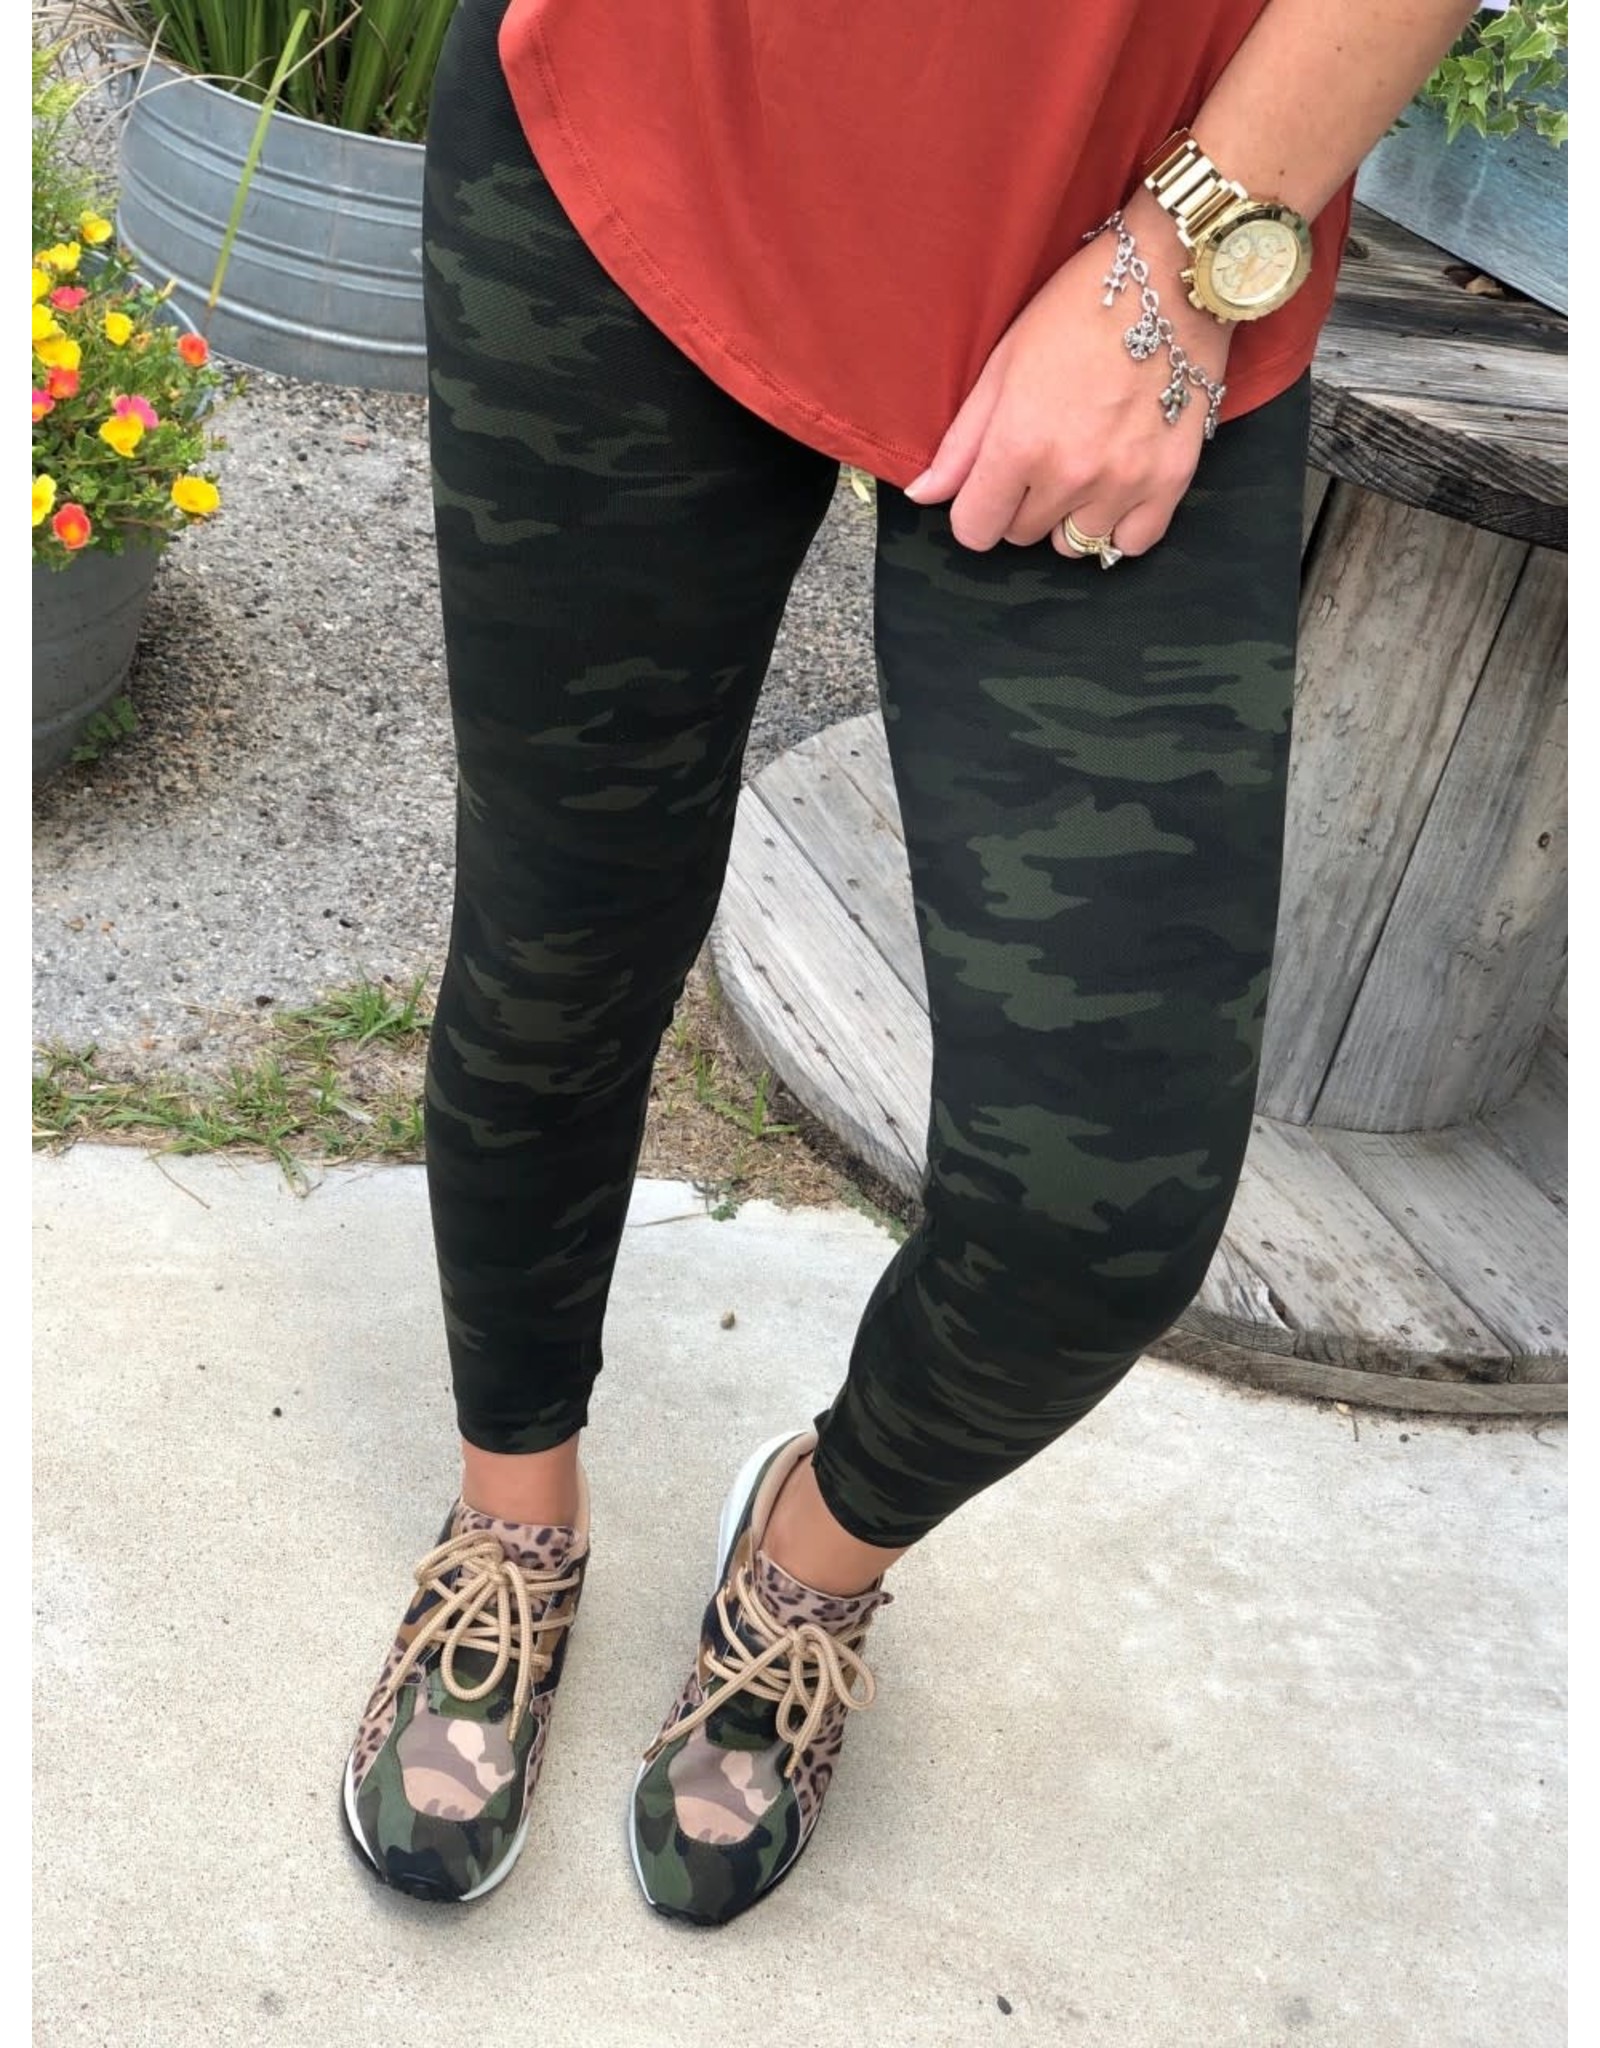 Spanx Look At Me Now High Waisted Seamless Camo Leggings Size 1X - $28 -  From Edith